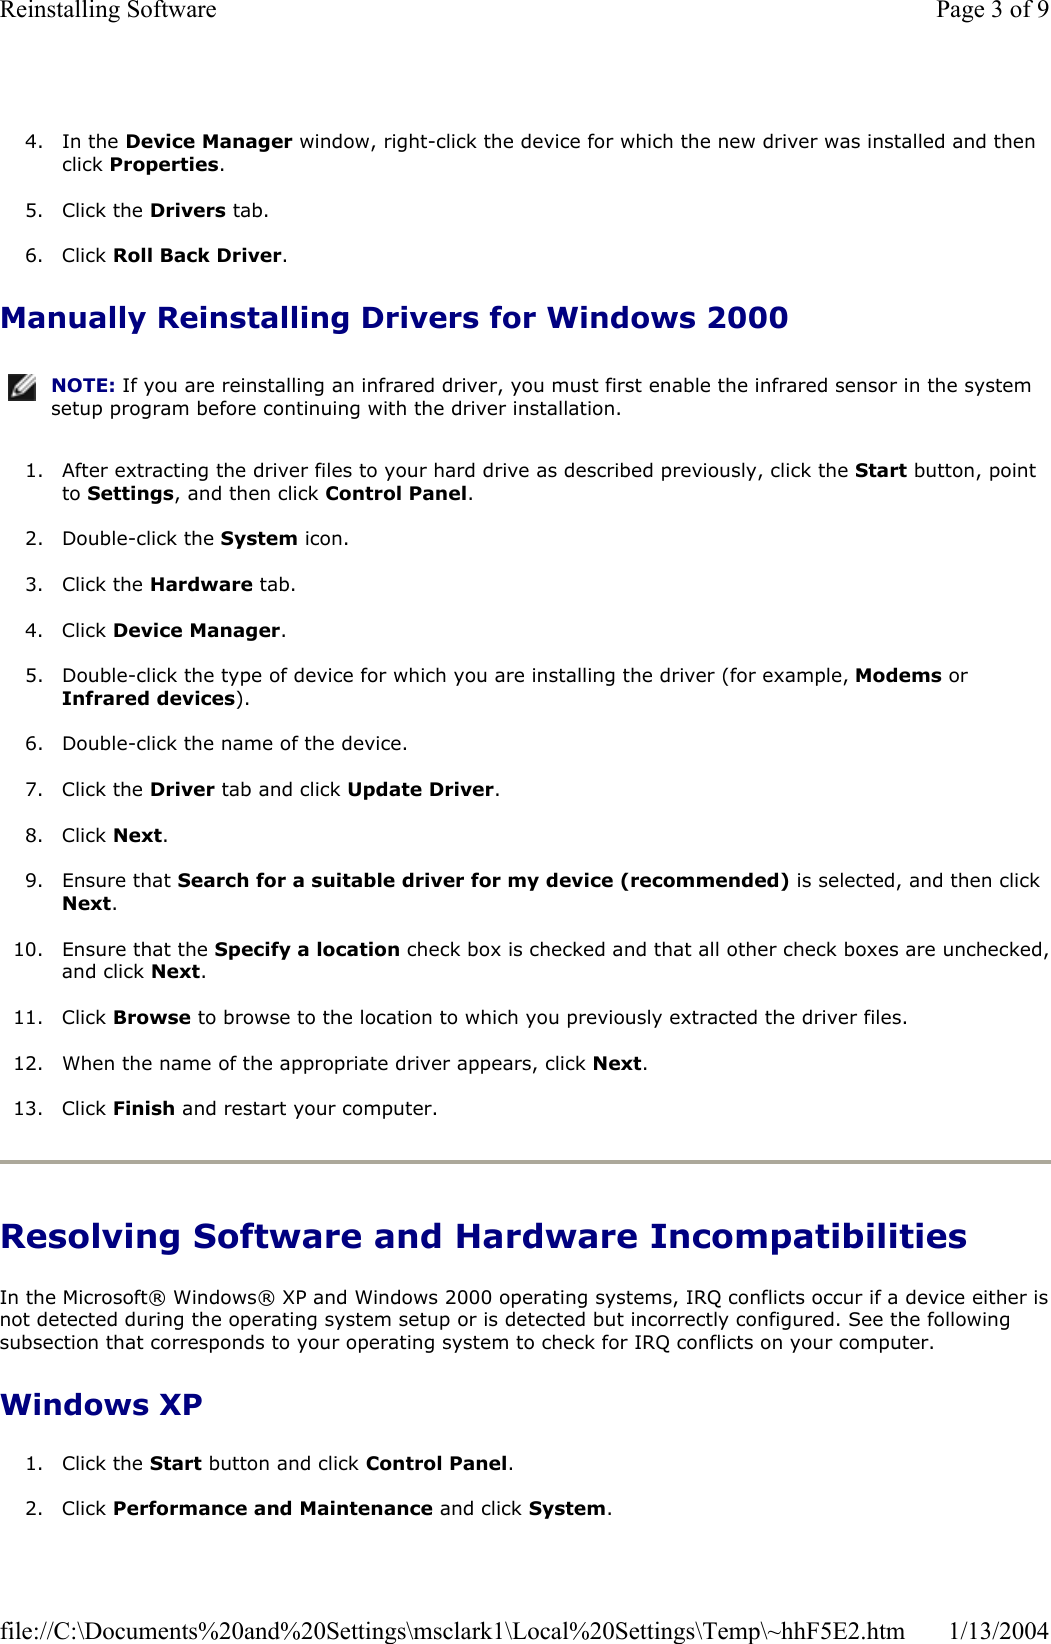 4. In the Device Manager window, right-click the device for which the new driver was installed and then click Properties.5. Click the Drivers tab.  6. Click Roll Back Driver.Manually Reinstalling Drivers for Windows 2000 1. After extracting the driver files to your hard drive as described previously, click the Start button, point to Settings, and then click Control Panel.2. Double-click the System icon. 3. Click the Hardware tab. 4. Click Device Manager.5. Double-click the type of device for which you are installing the driver (for example, Modems or Infrared devices).6. Double-click the name of the device. 7. Click the Driver tab and click Update Driver.8. Click Next.9. Ensure that Search for a suitable driver for my device (recommended) is selected, and then click Next.10. Ensure that the Specify a location check box is checked and that all other check boxes are unchecked,and click Next.11. Click Browse to browse to the location to which you previously extracted the driver files. 12. When the name of the appropriate driver appears, click Next.13. Click Finish and restart your computer. Resolving Software and Hardware Incompatibilities In the Microsoft® Windows® XP and Windows 2000 operating systems, IRQ conflicts occur if a device either isnot detected during the operating system setup or is detected but incorrectly configured. See the following subsection that corresponds to your operating system to check for IRQ conflicts on your computer. Windows XP 1. Click the Start button and click Control Panel.2. Click Performance and Maintenance and click System.NOTE: If you are reinstalling an infrared driver, you must first enable the infrared sensor in the system setup program before continuing with the driver installation.Page 3 of 9Reinstalling Software1/13/2004file://C:\Documents%20and%20Settings\msclark1\Local%20Settings\Temp\~hhF5E2.htm